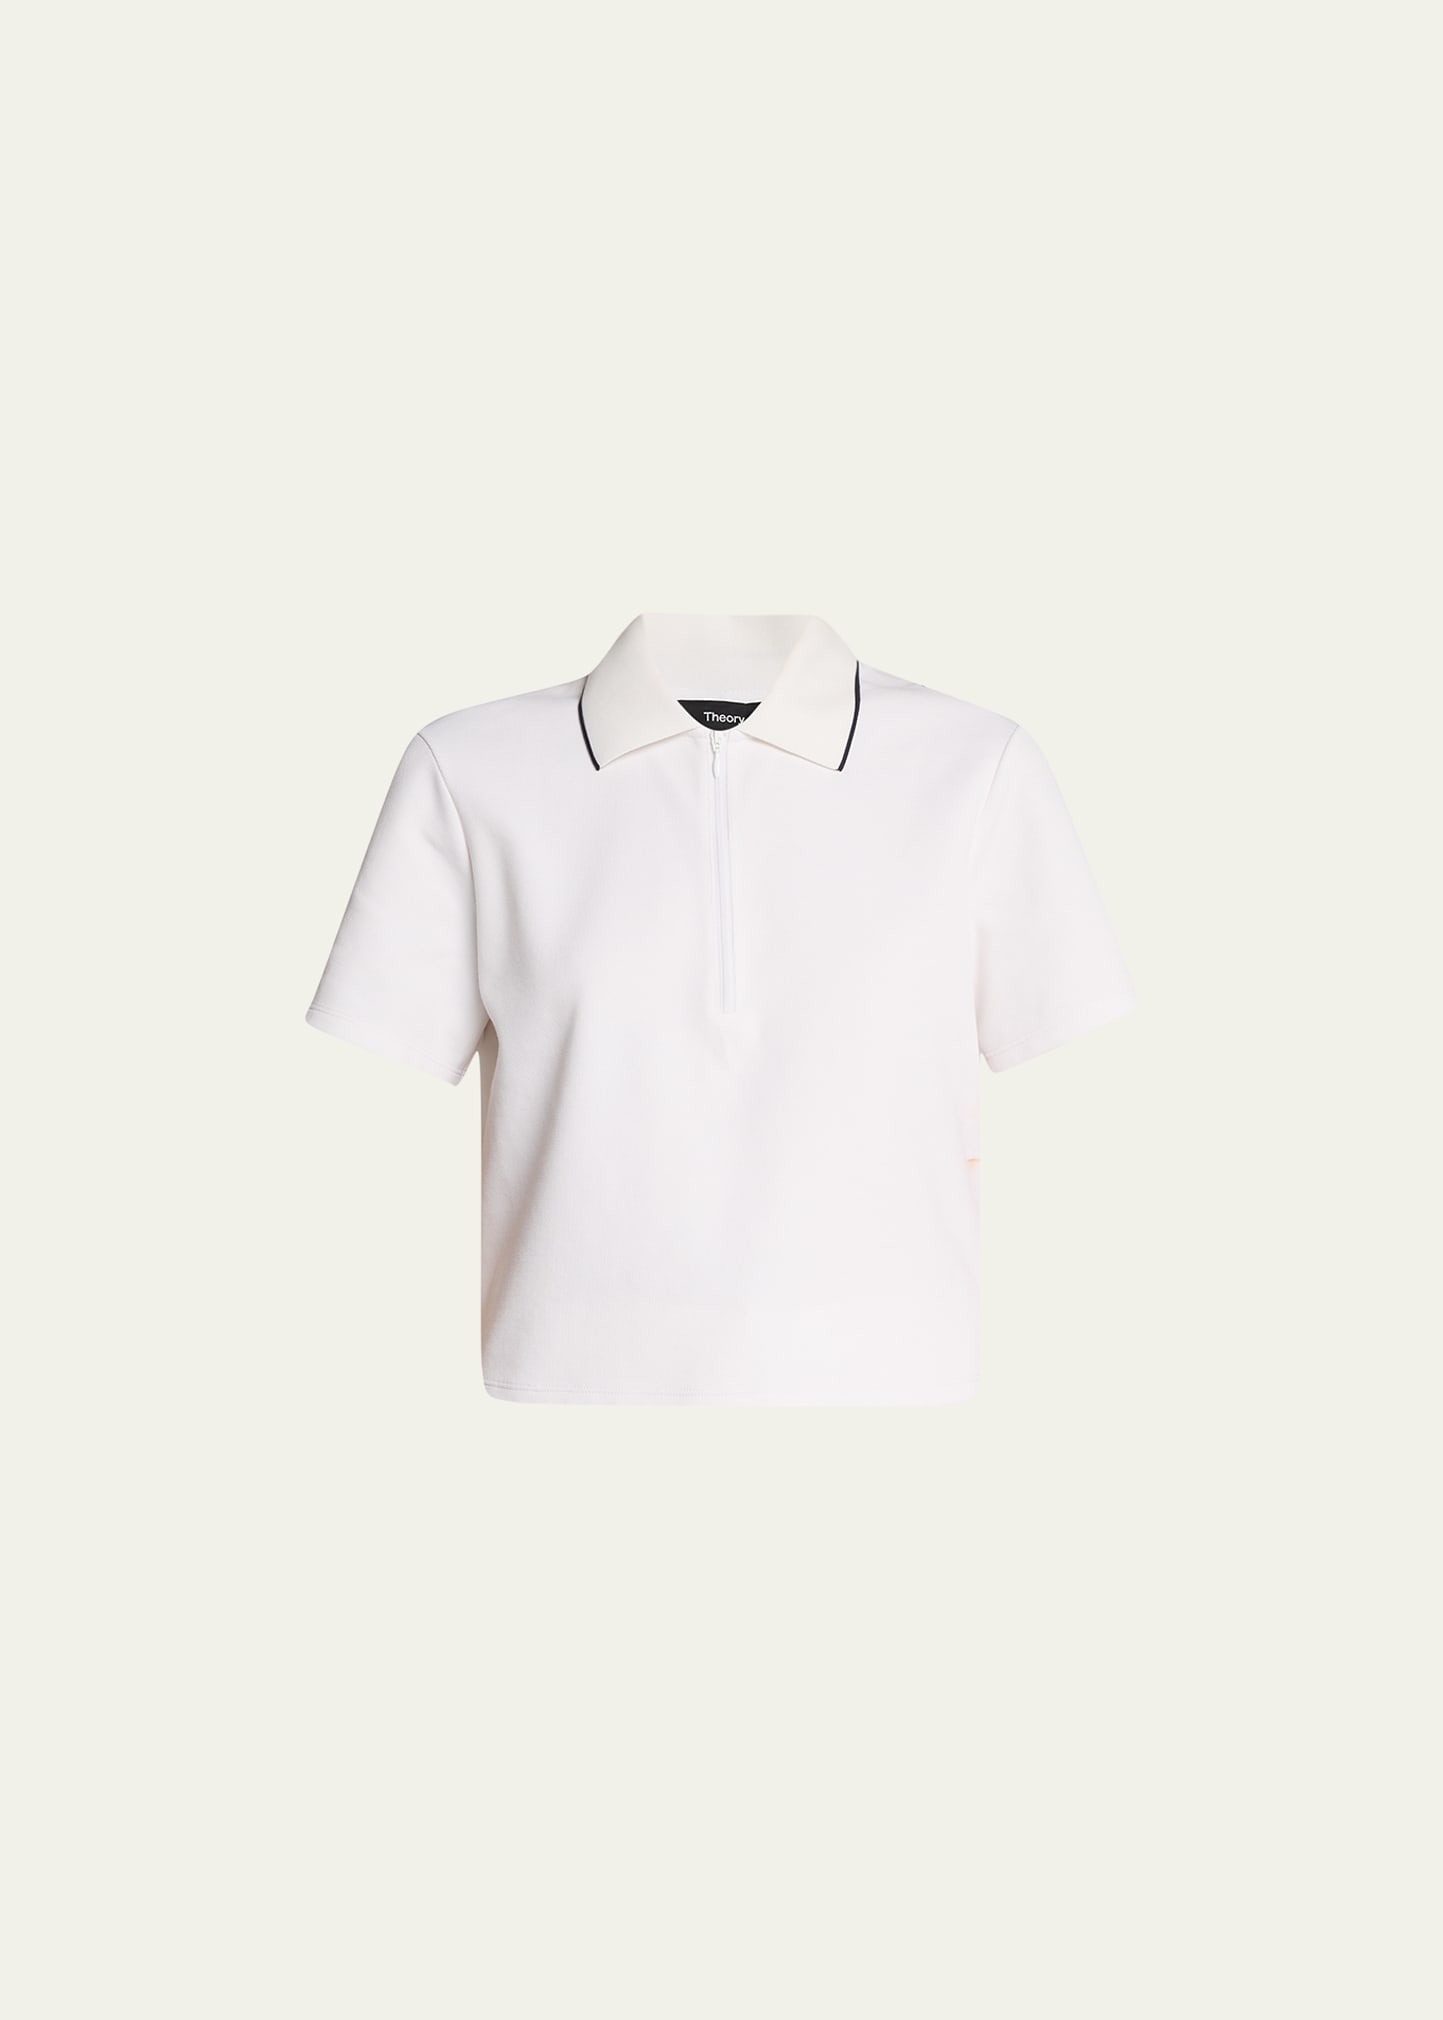 THEORY TENNIS POLO ZIP-FRONT TOP